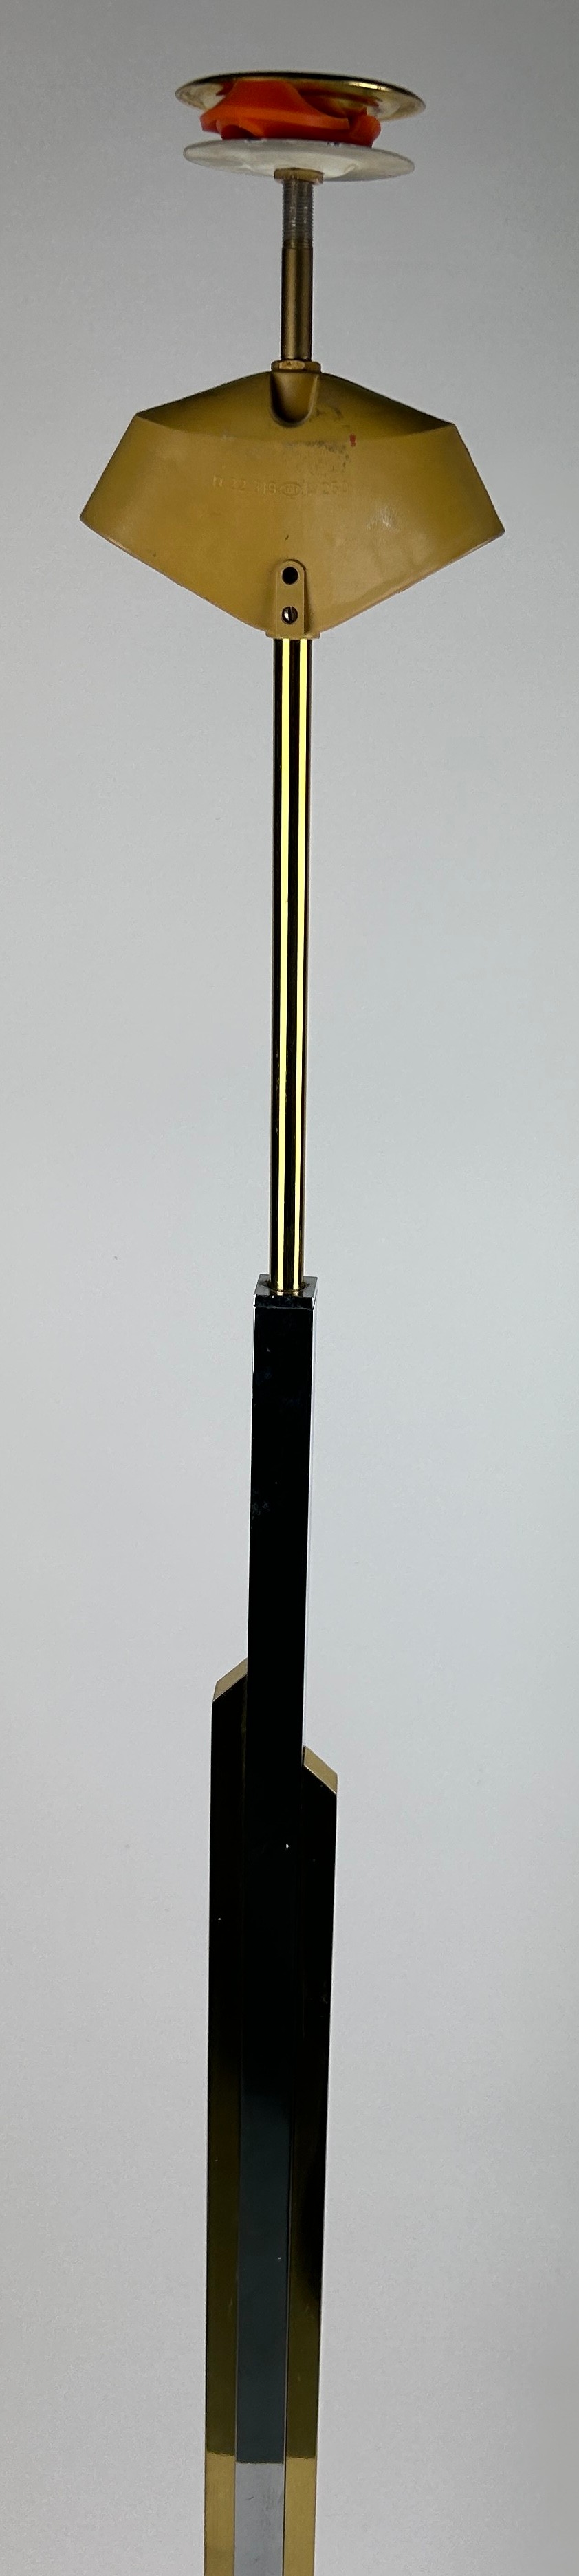 AN ATTRIBUTED TO WILLY RIZZO SKYSCRAPER FLOOR STANDING LAMP - Image 3 of 5